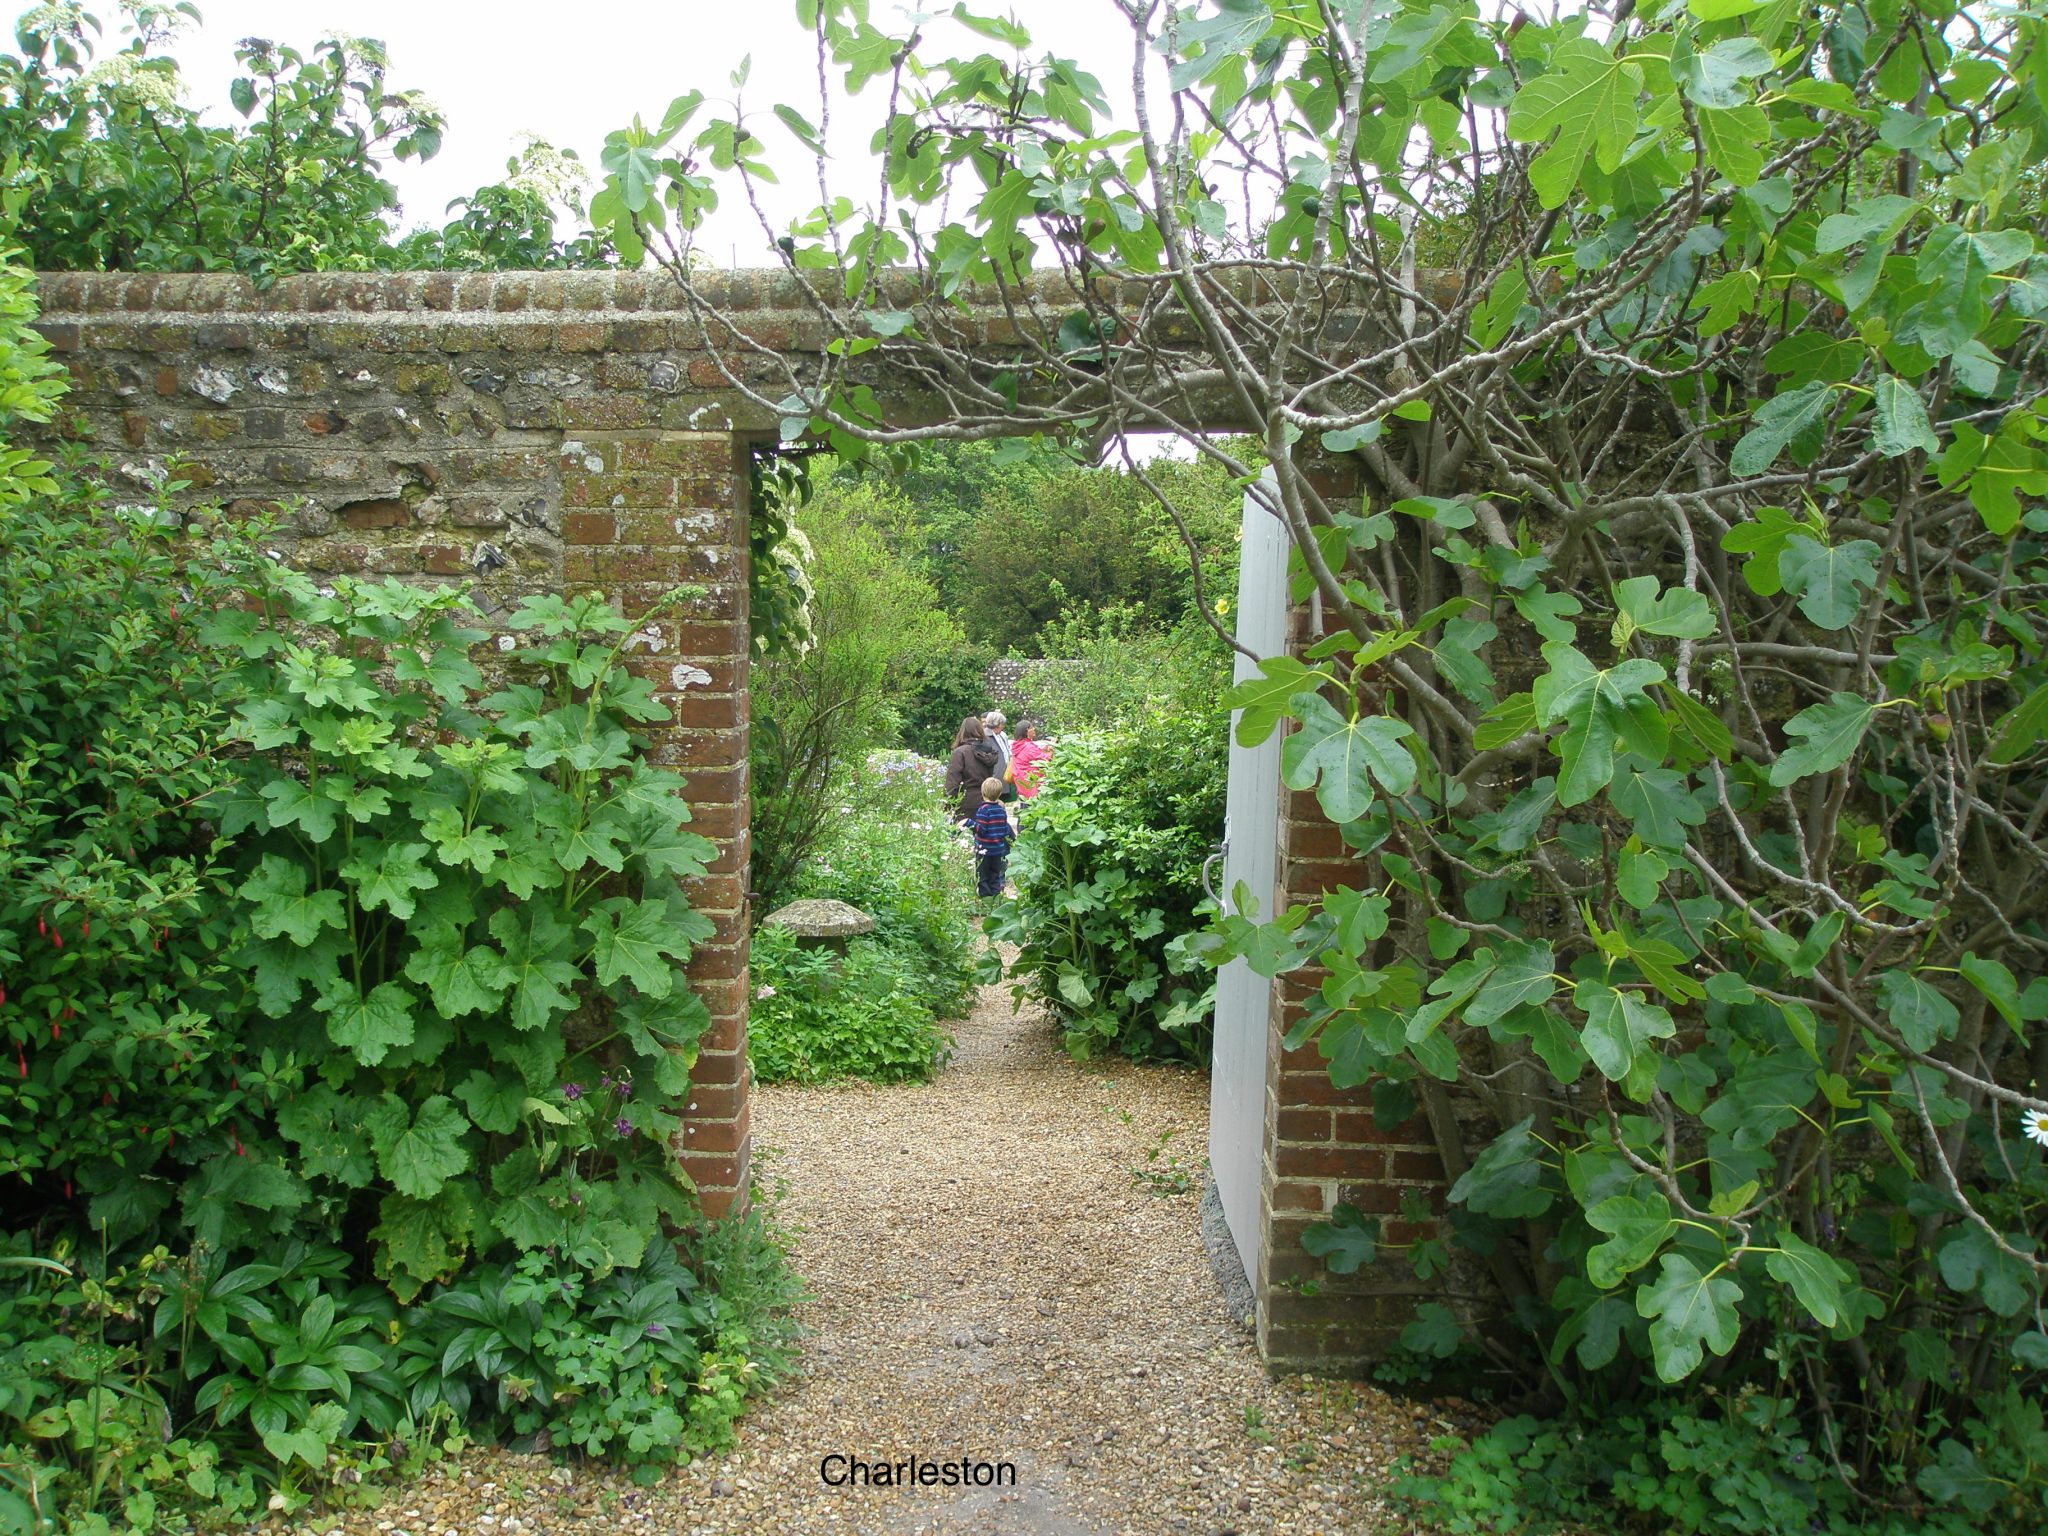 We enter the Walled Garden, which is behind the House